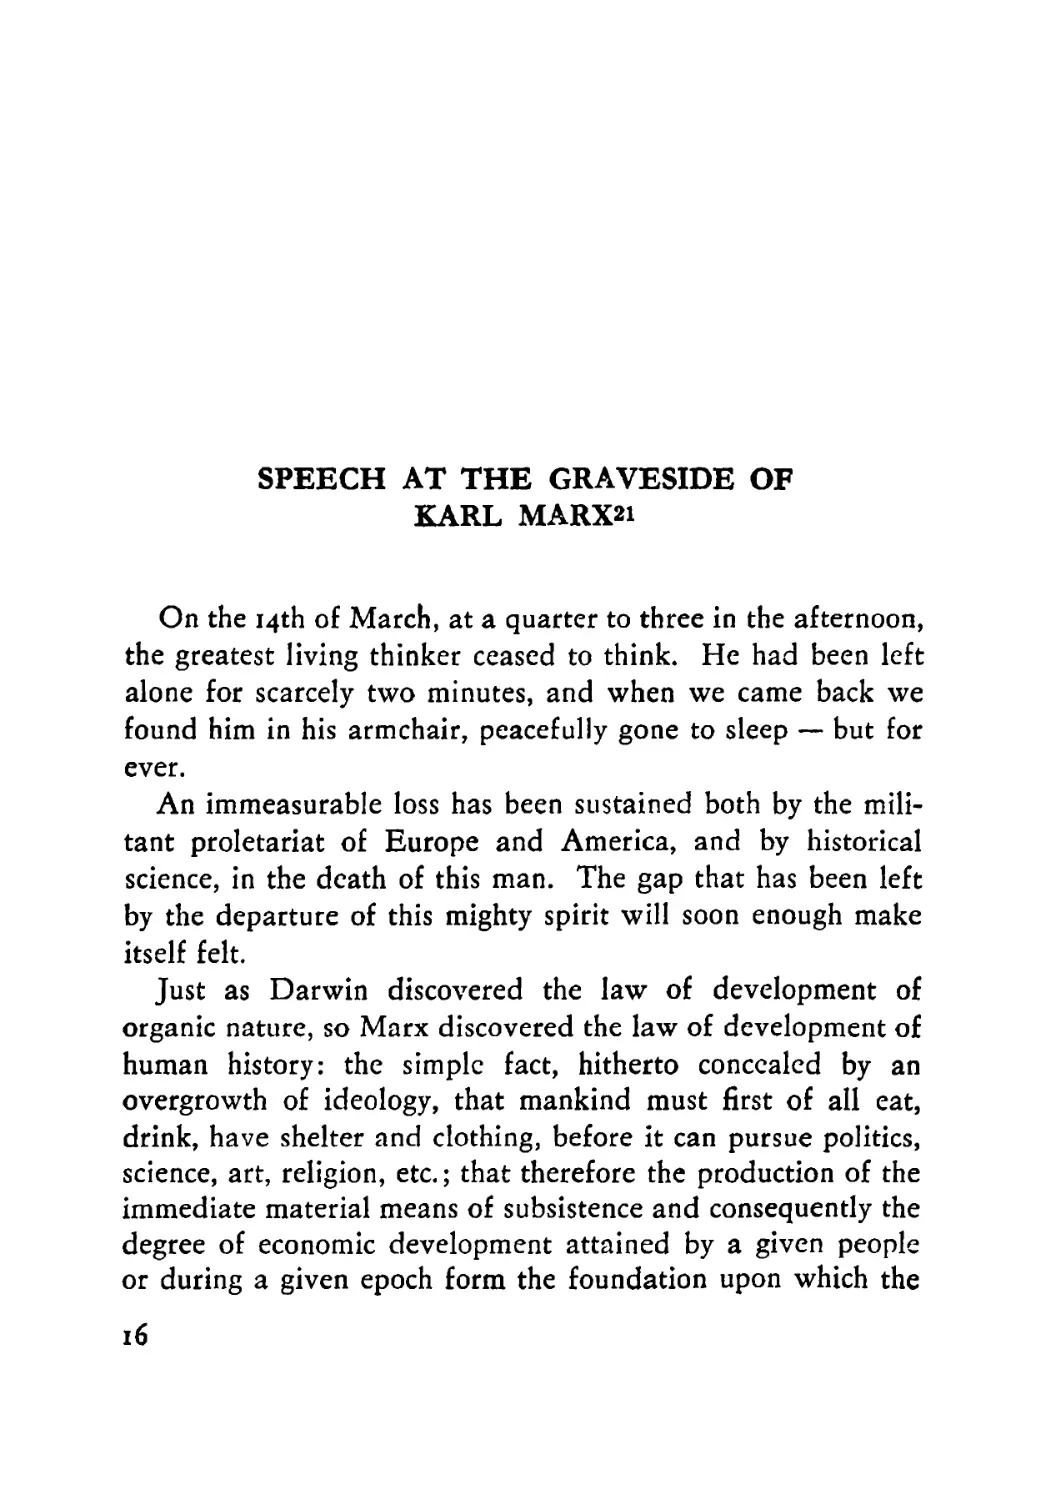 Speech at the graveside of Karl Marx